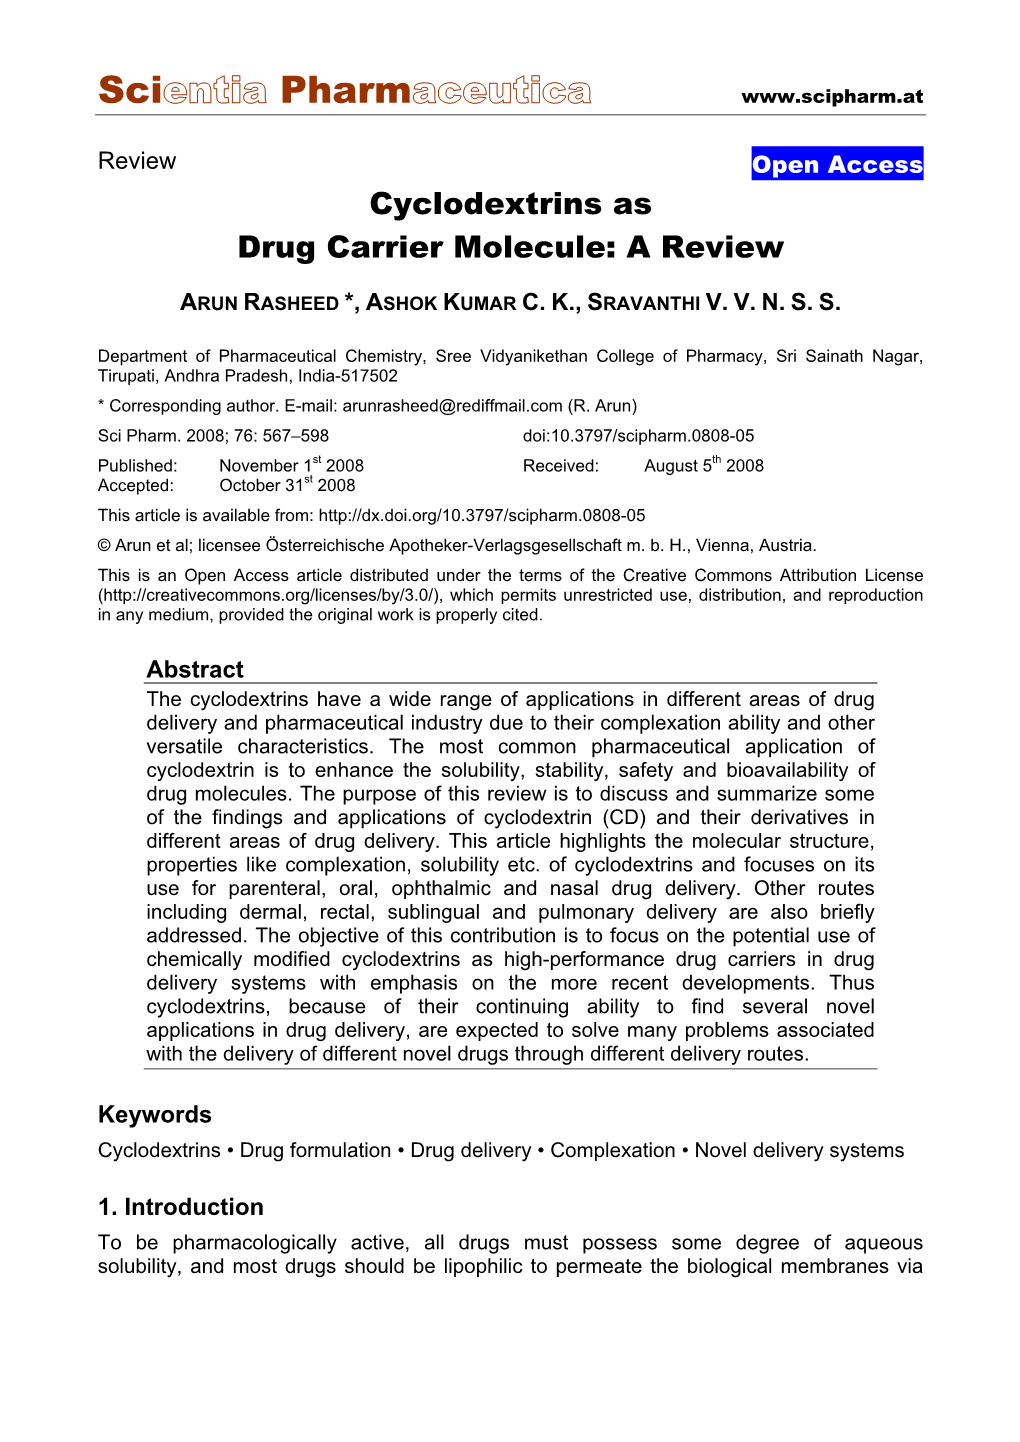 Cyclodextrins As Drug Carrier Molecule: a Review